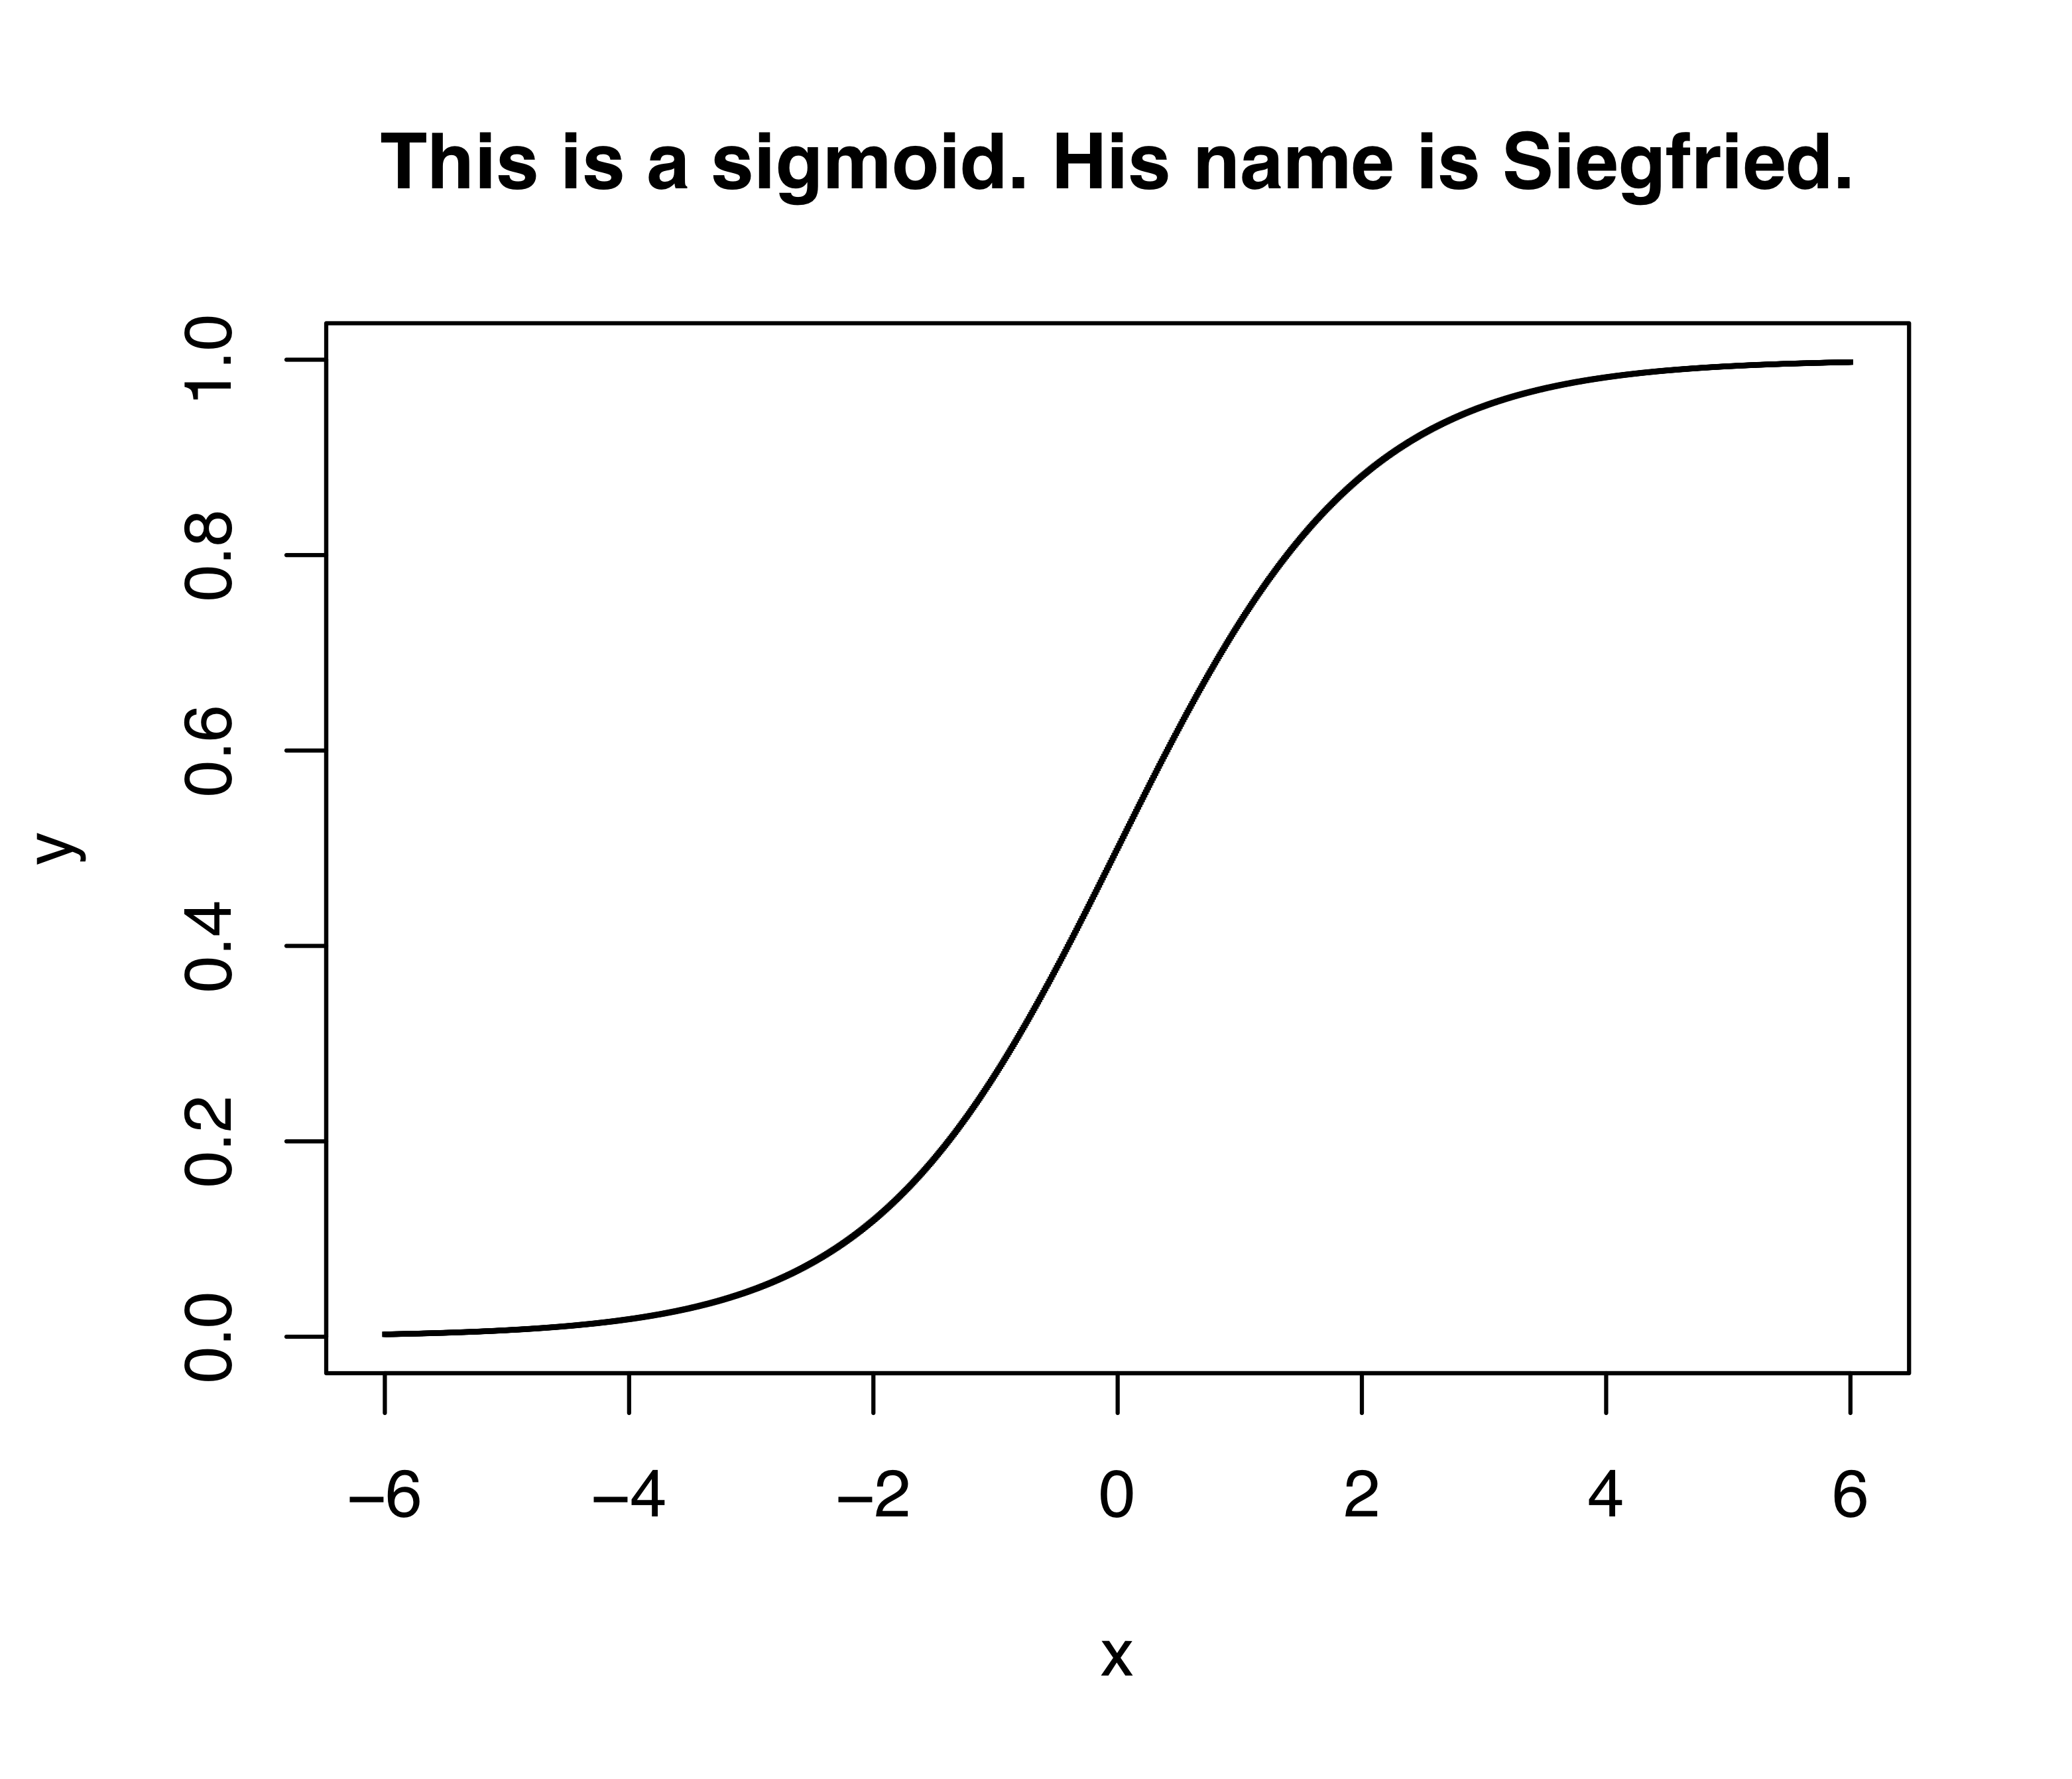 The sigmoid, a simple nonlinear function